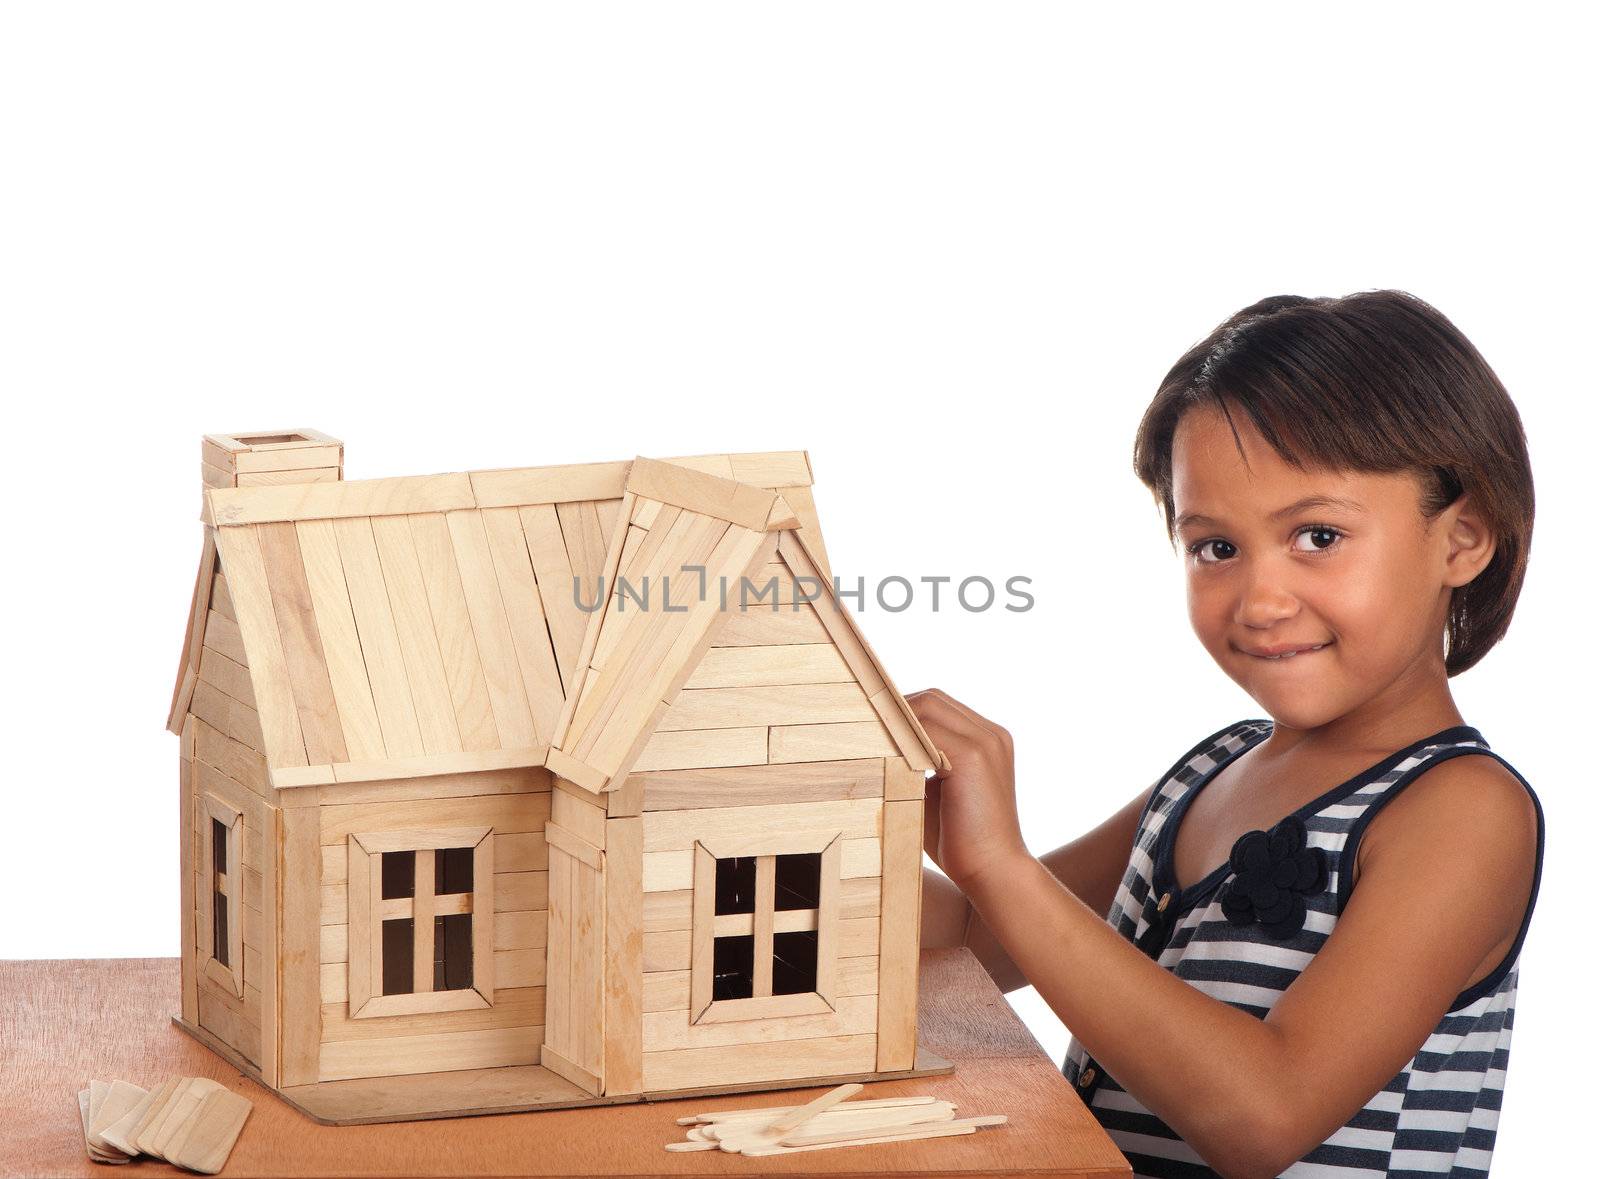 A smiling young girl stands next to the popsicle house she is building.